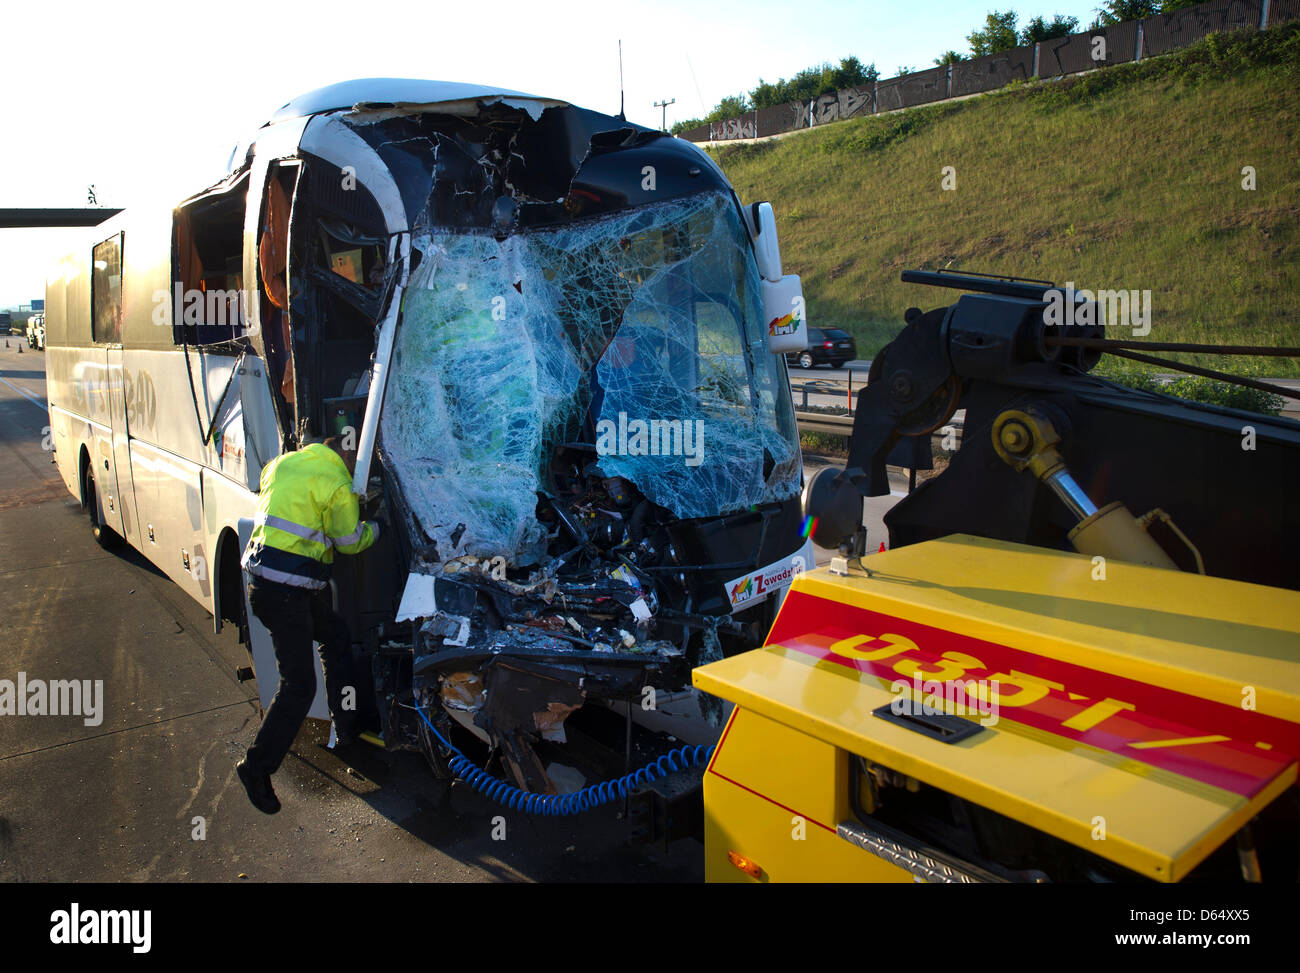 ADAC employees inspect a heavily damaged Polish bus on the autobahn A4 between Dresden Altenstadt and the Dresden junction, Germany, 06 June 2012. The bus collided with a truck for unknown reasons announced a police spokesperson. According to the fire department the passengers were able to leave the bus on their own. 25 passengers were taken to hospitals for treatment. 18 passenger Stock Photo